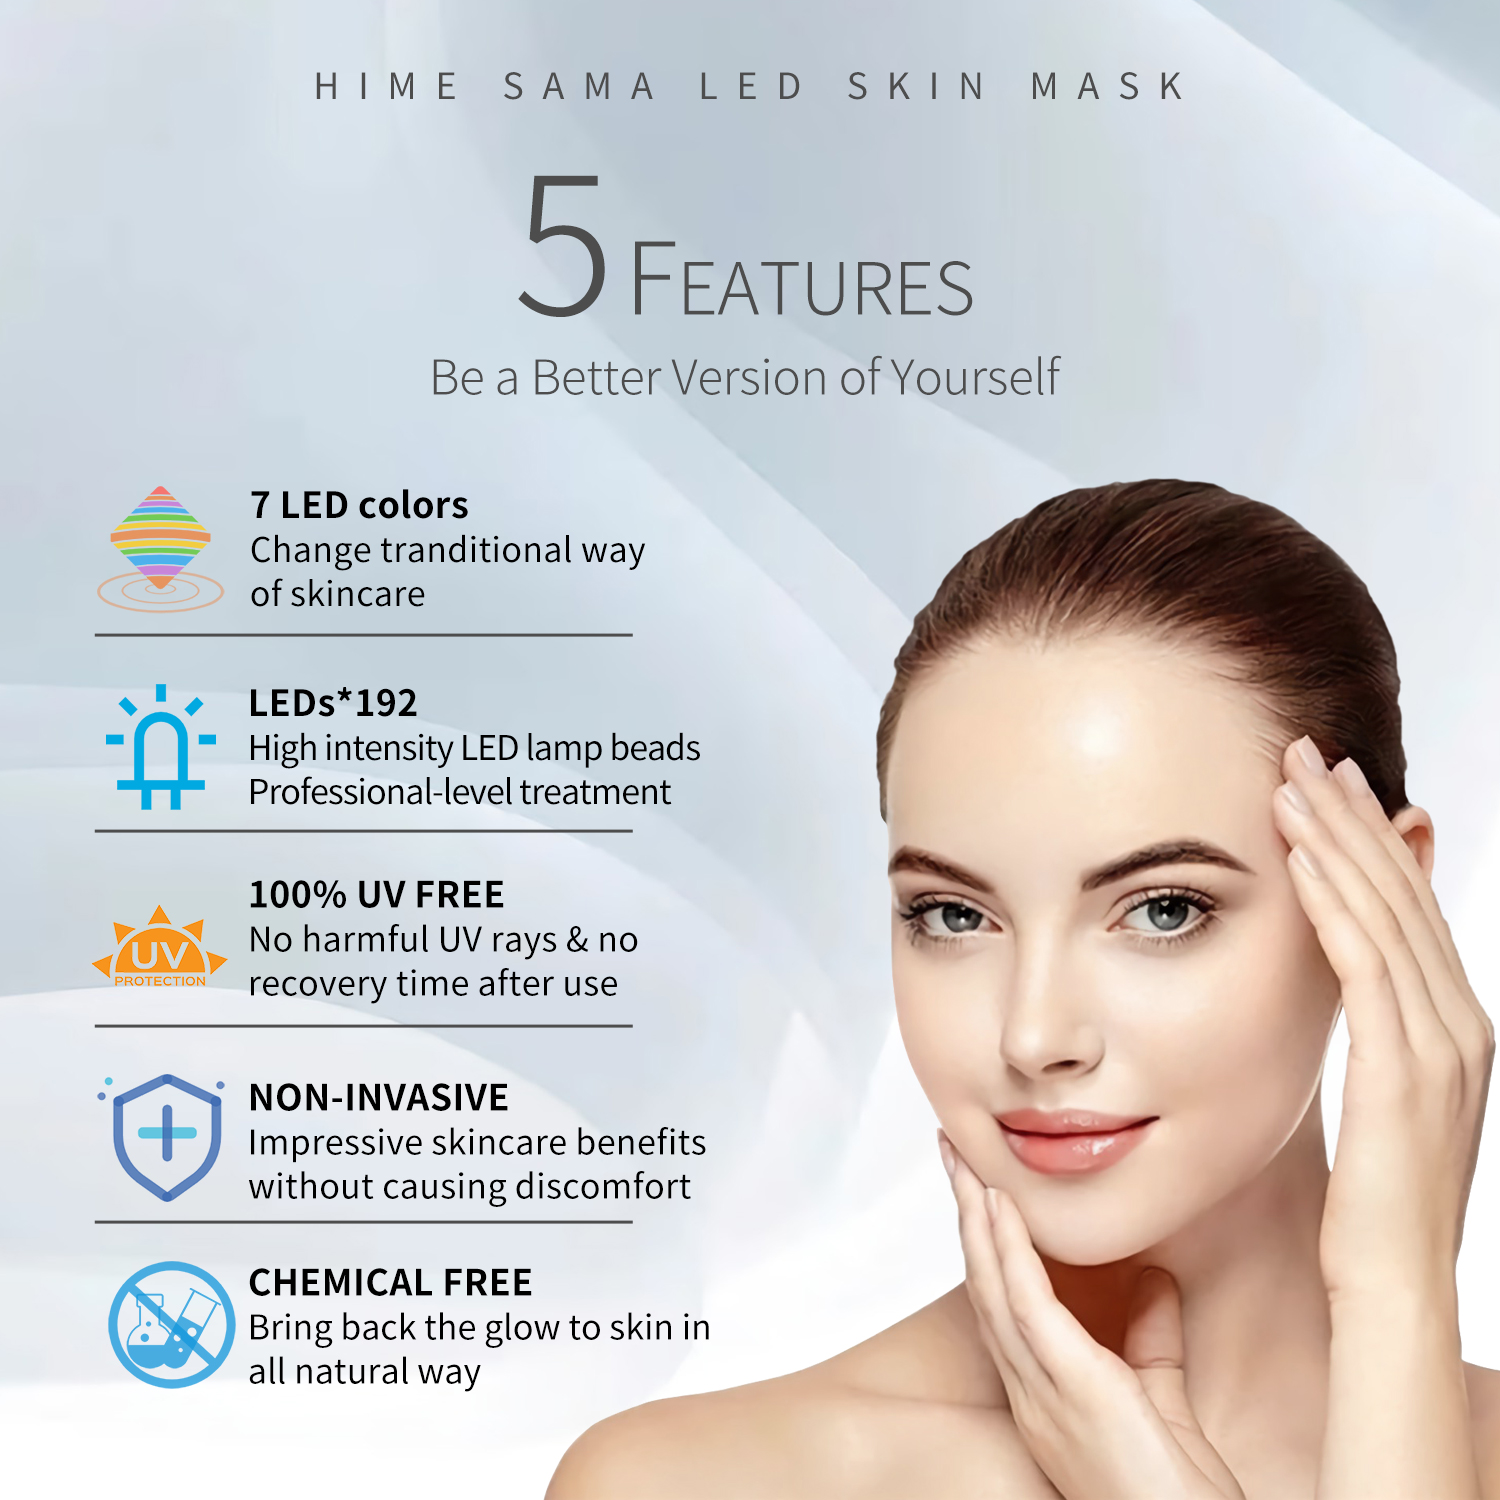 LED Skin Mask-CE Cleared Pro 7 LED Skin Care Mask for Face and Neck Skin Rejuvenation Light Therapy Facial Care Mask and Optical Cosmetic Mask Portable for Home and Travel Use - image 6 of 7